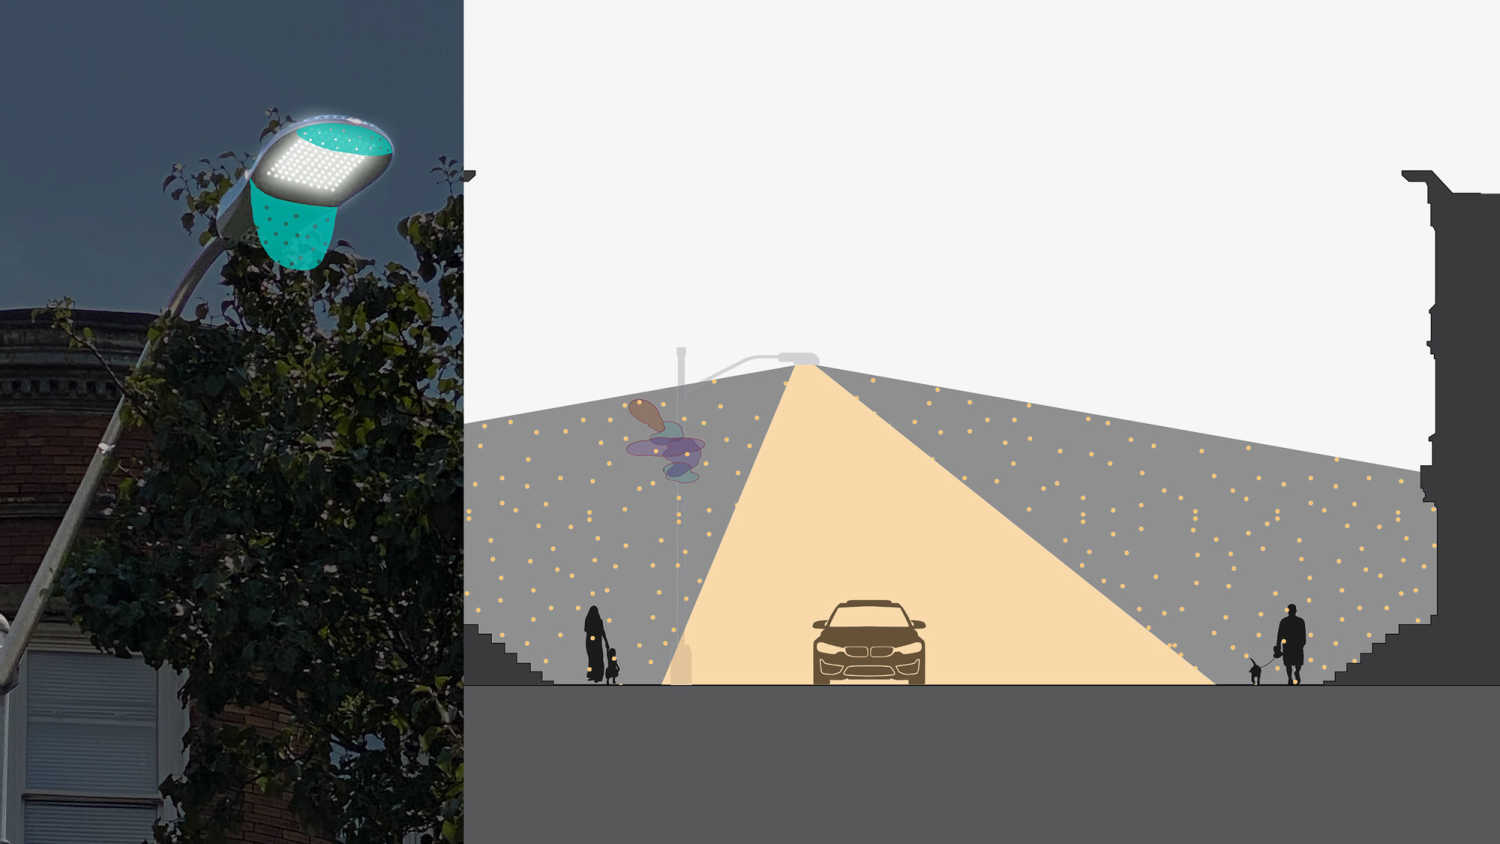 CONCEPT: LIGHT SHIELDS (FLUX STUDIO) close-up, showing how the attachment keeps bright light on the road only instead of overpowering the sidewalks and facades.